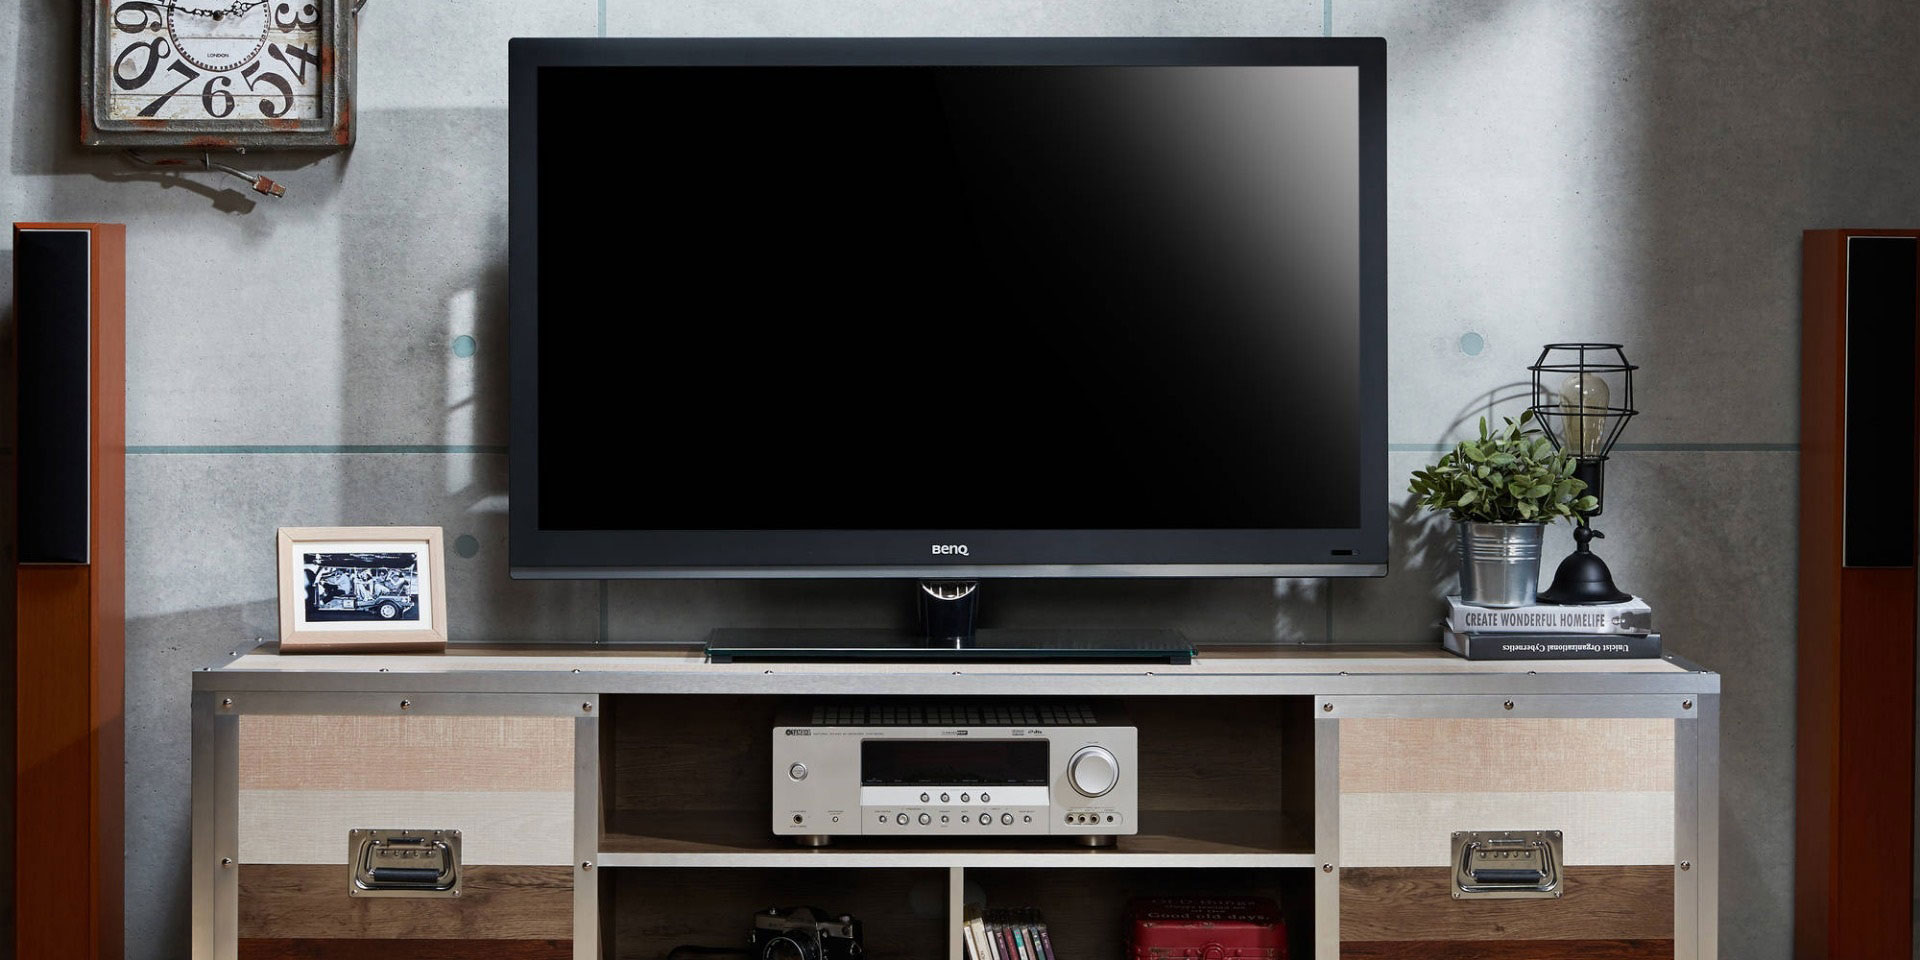 How To Connect TV To An AV Receiver Without HDMI